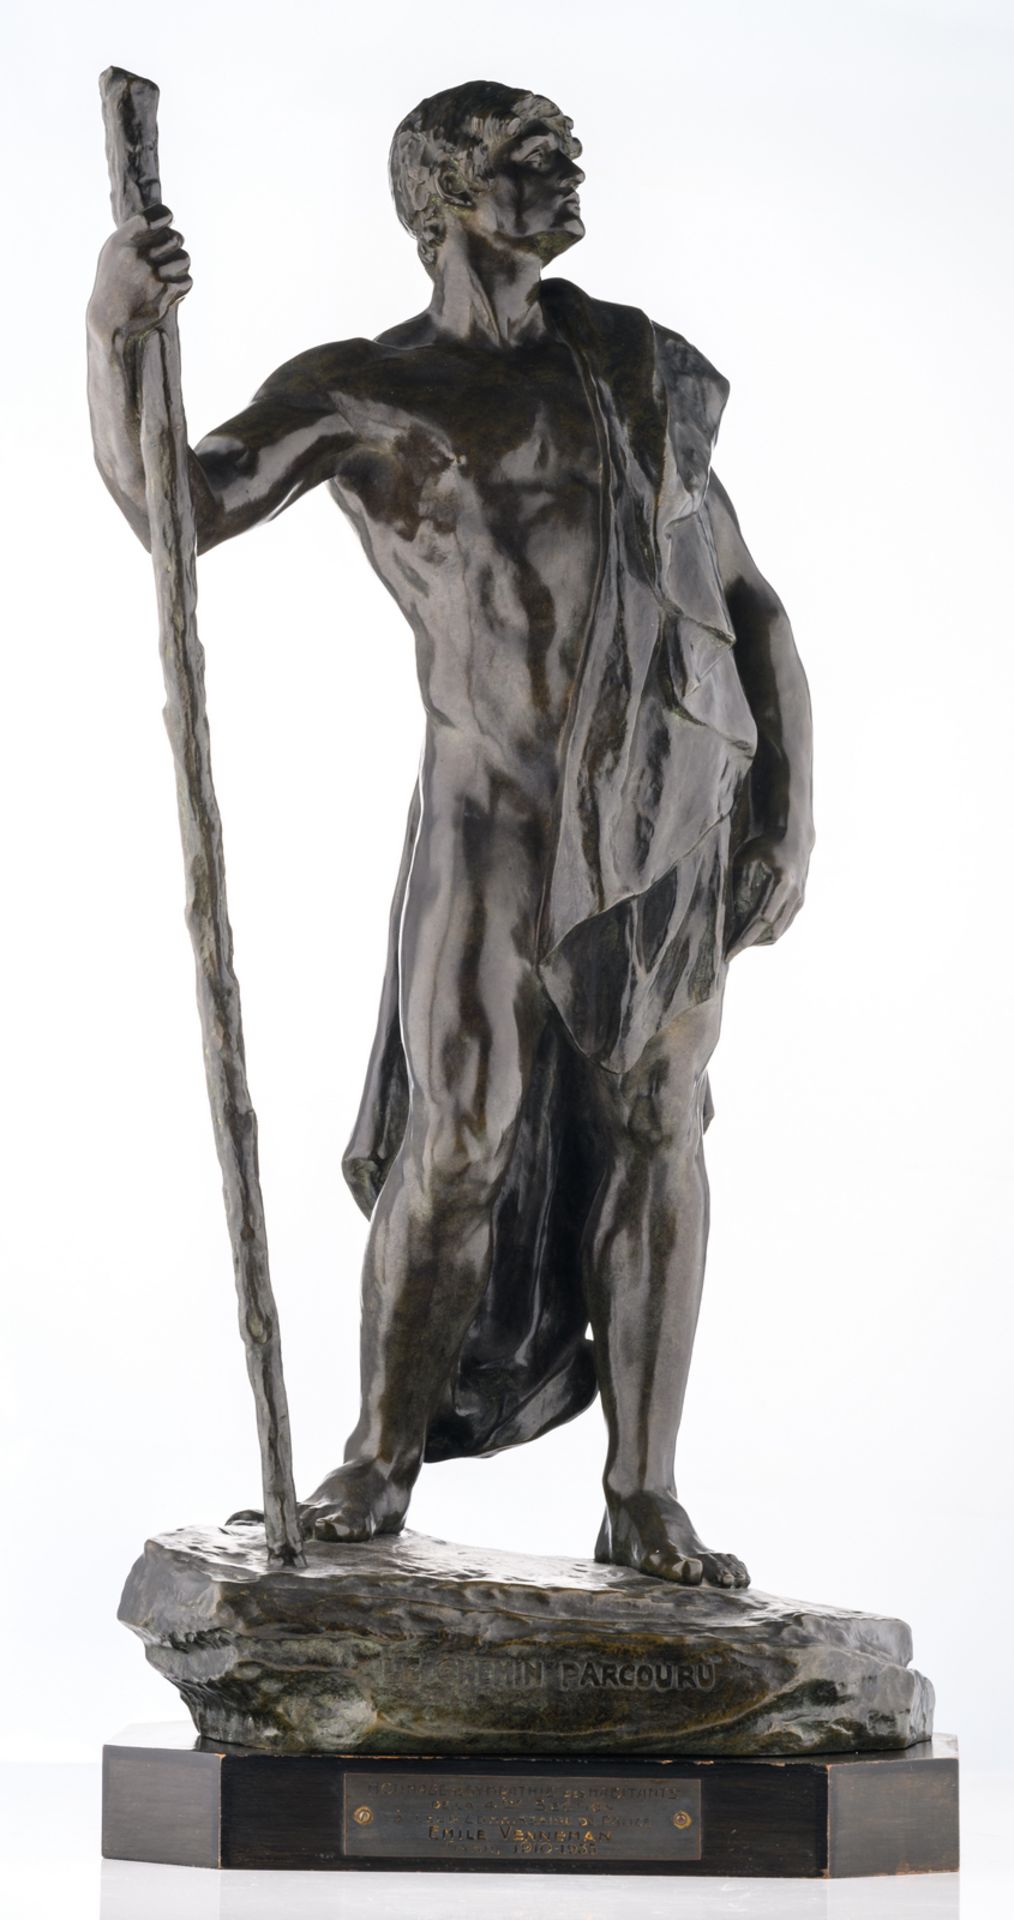 Colin G., 'Le chemin parcouru', patinated bronze, on a wooden base with dedication to Emile - Bild 2 aus 9